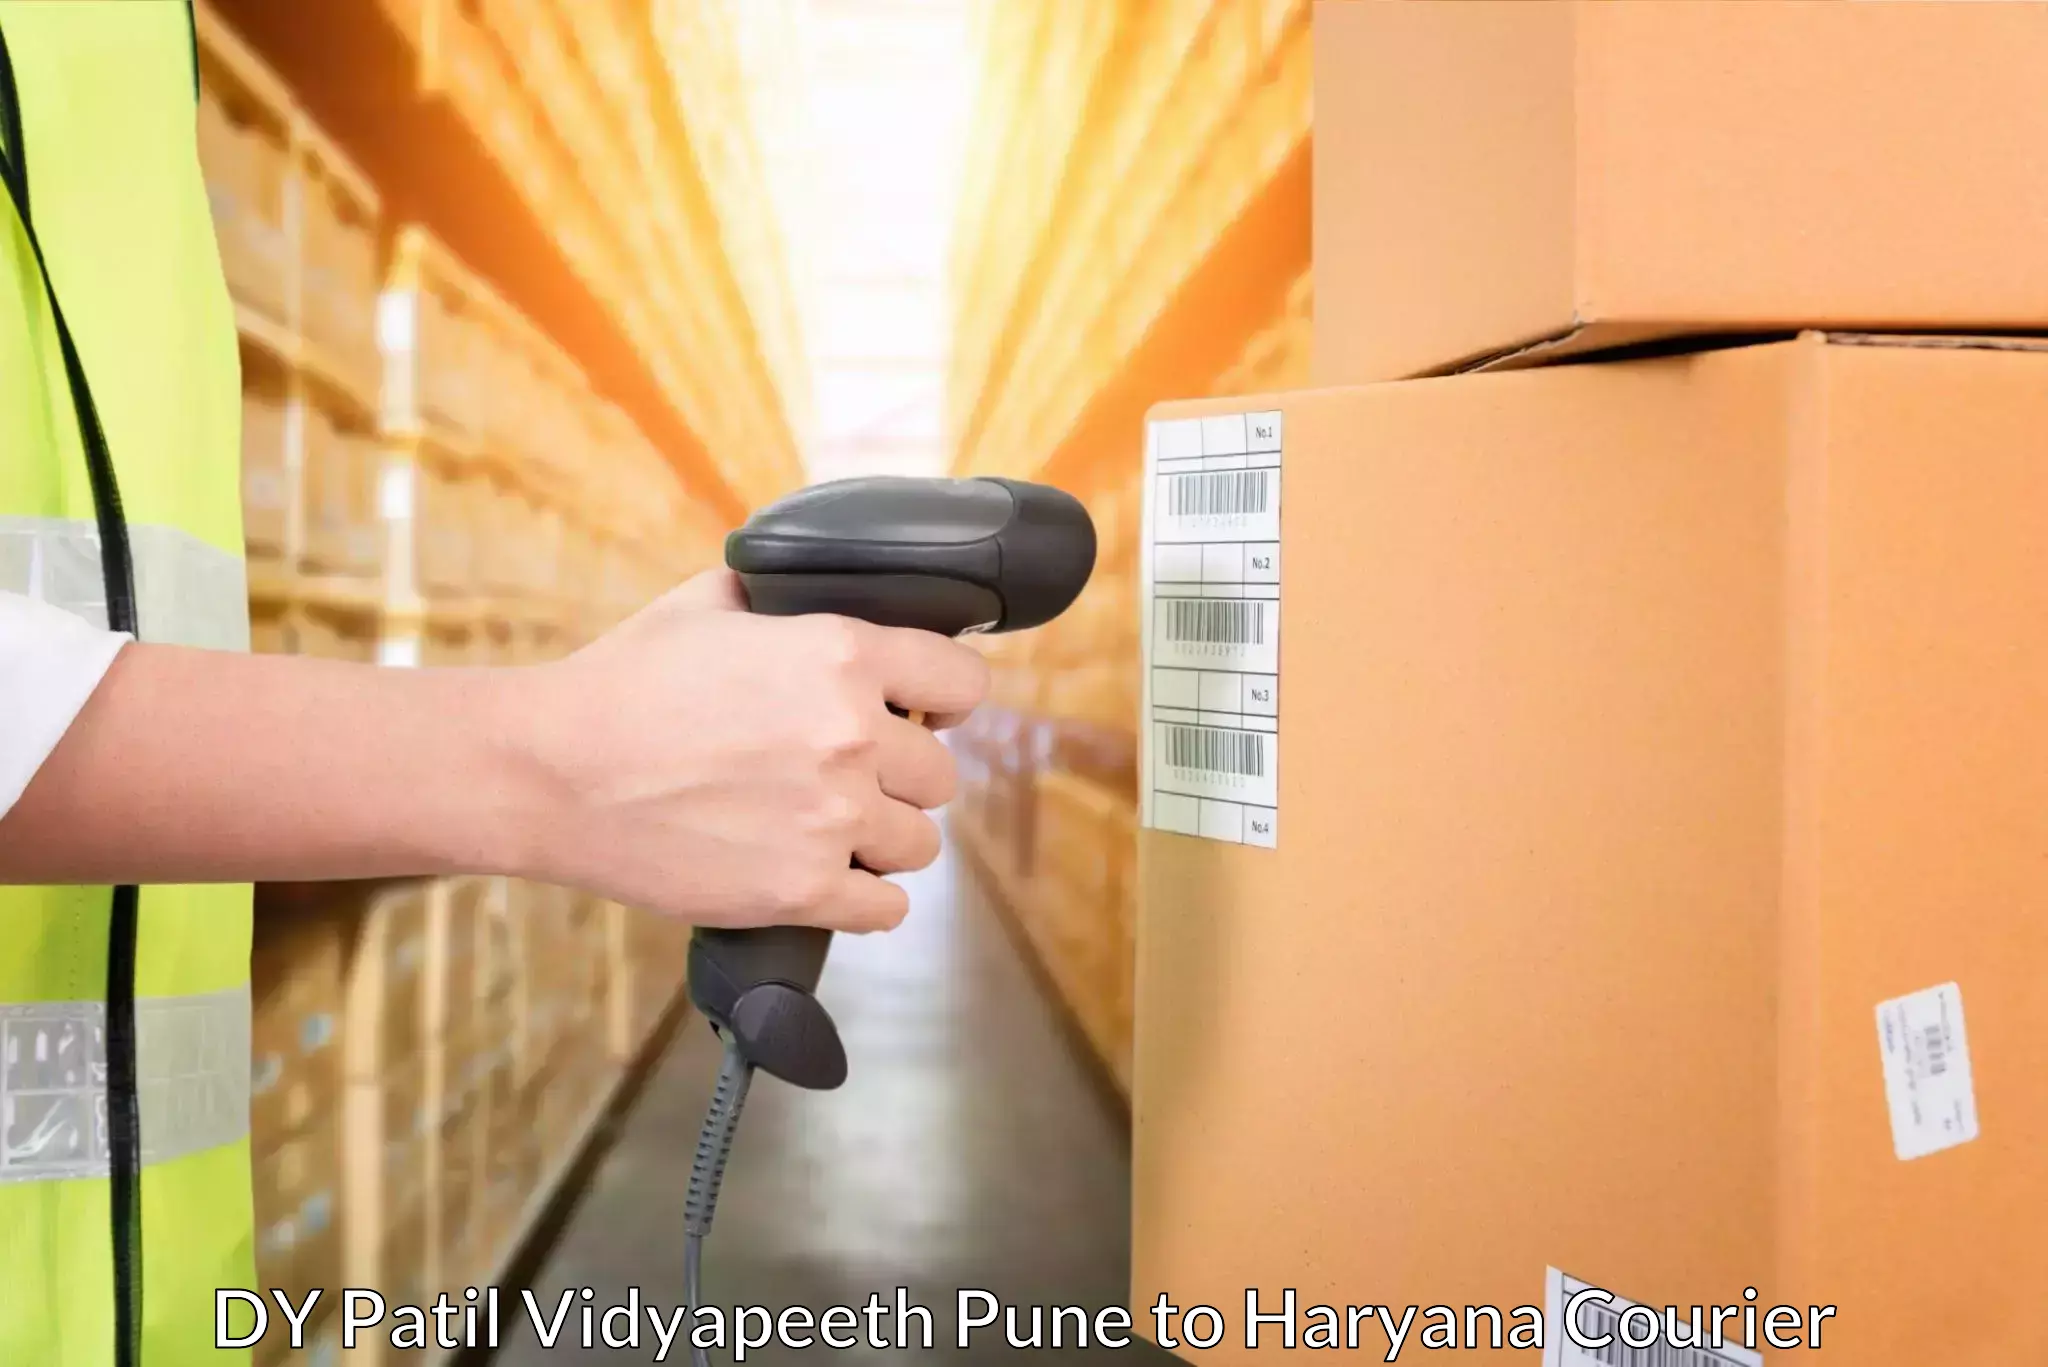 Advanced delivery network DY Patil Vidyapeeth Pune to Haryana